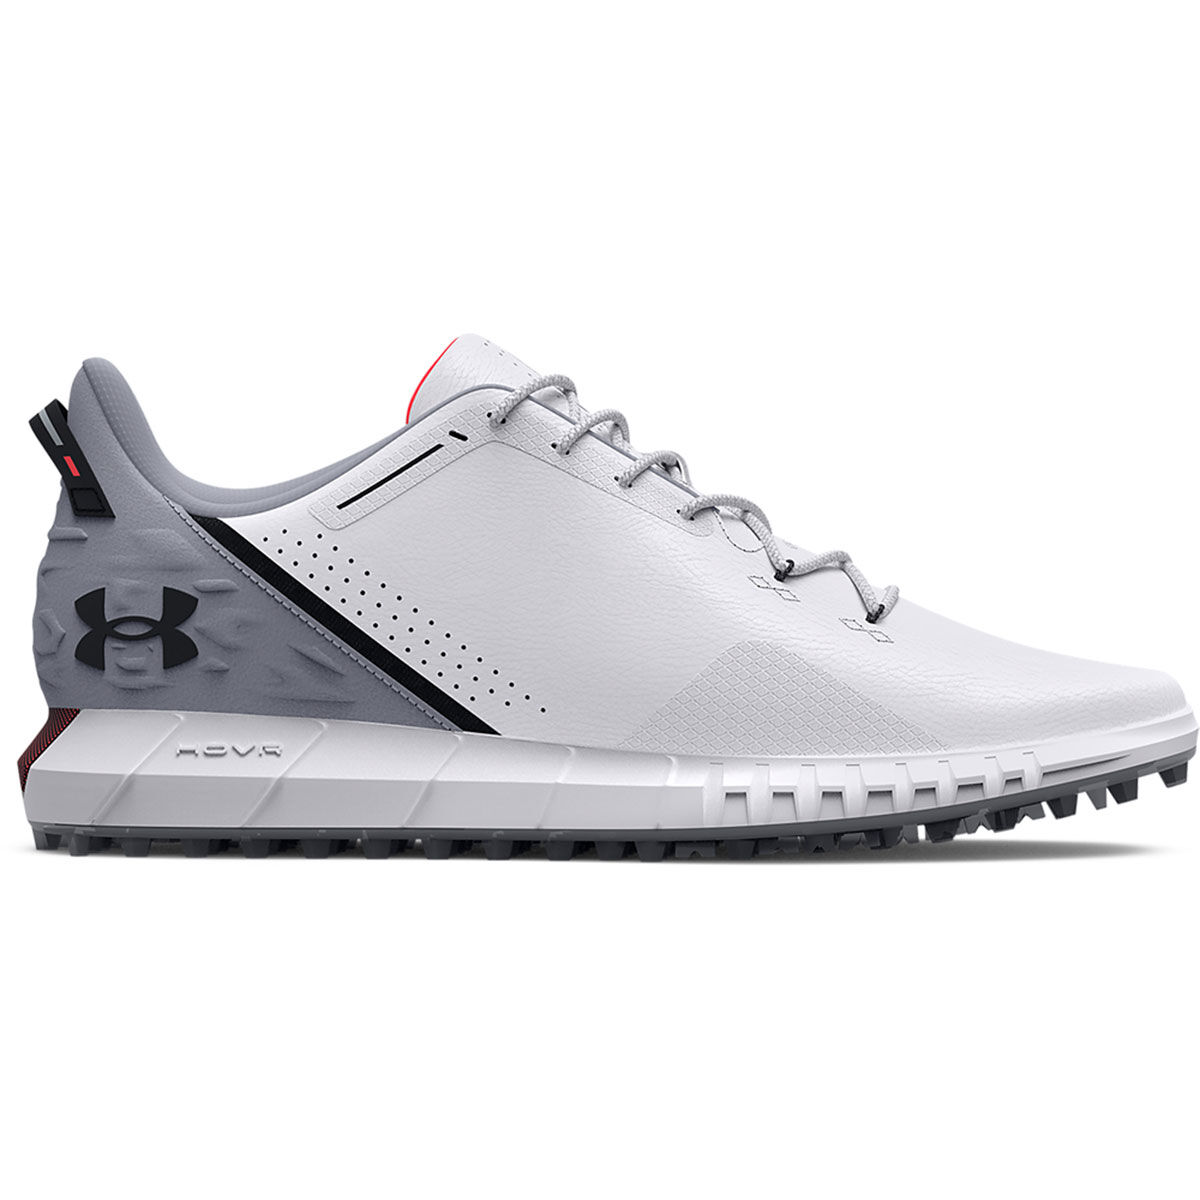 Under Armour Mens Hovr Drive Spikeless Golf Shoes, Male, White/Grey/Black, Size: 7 | American Golf